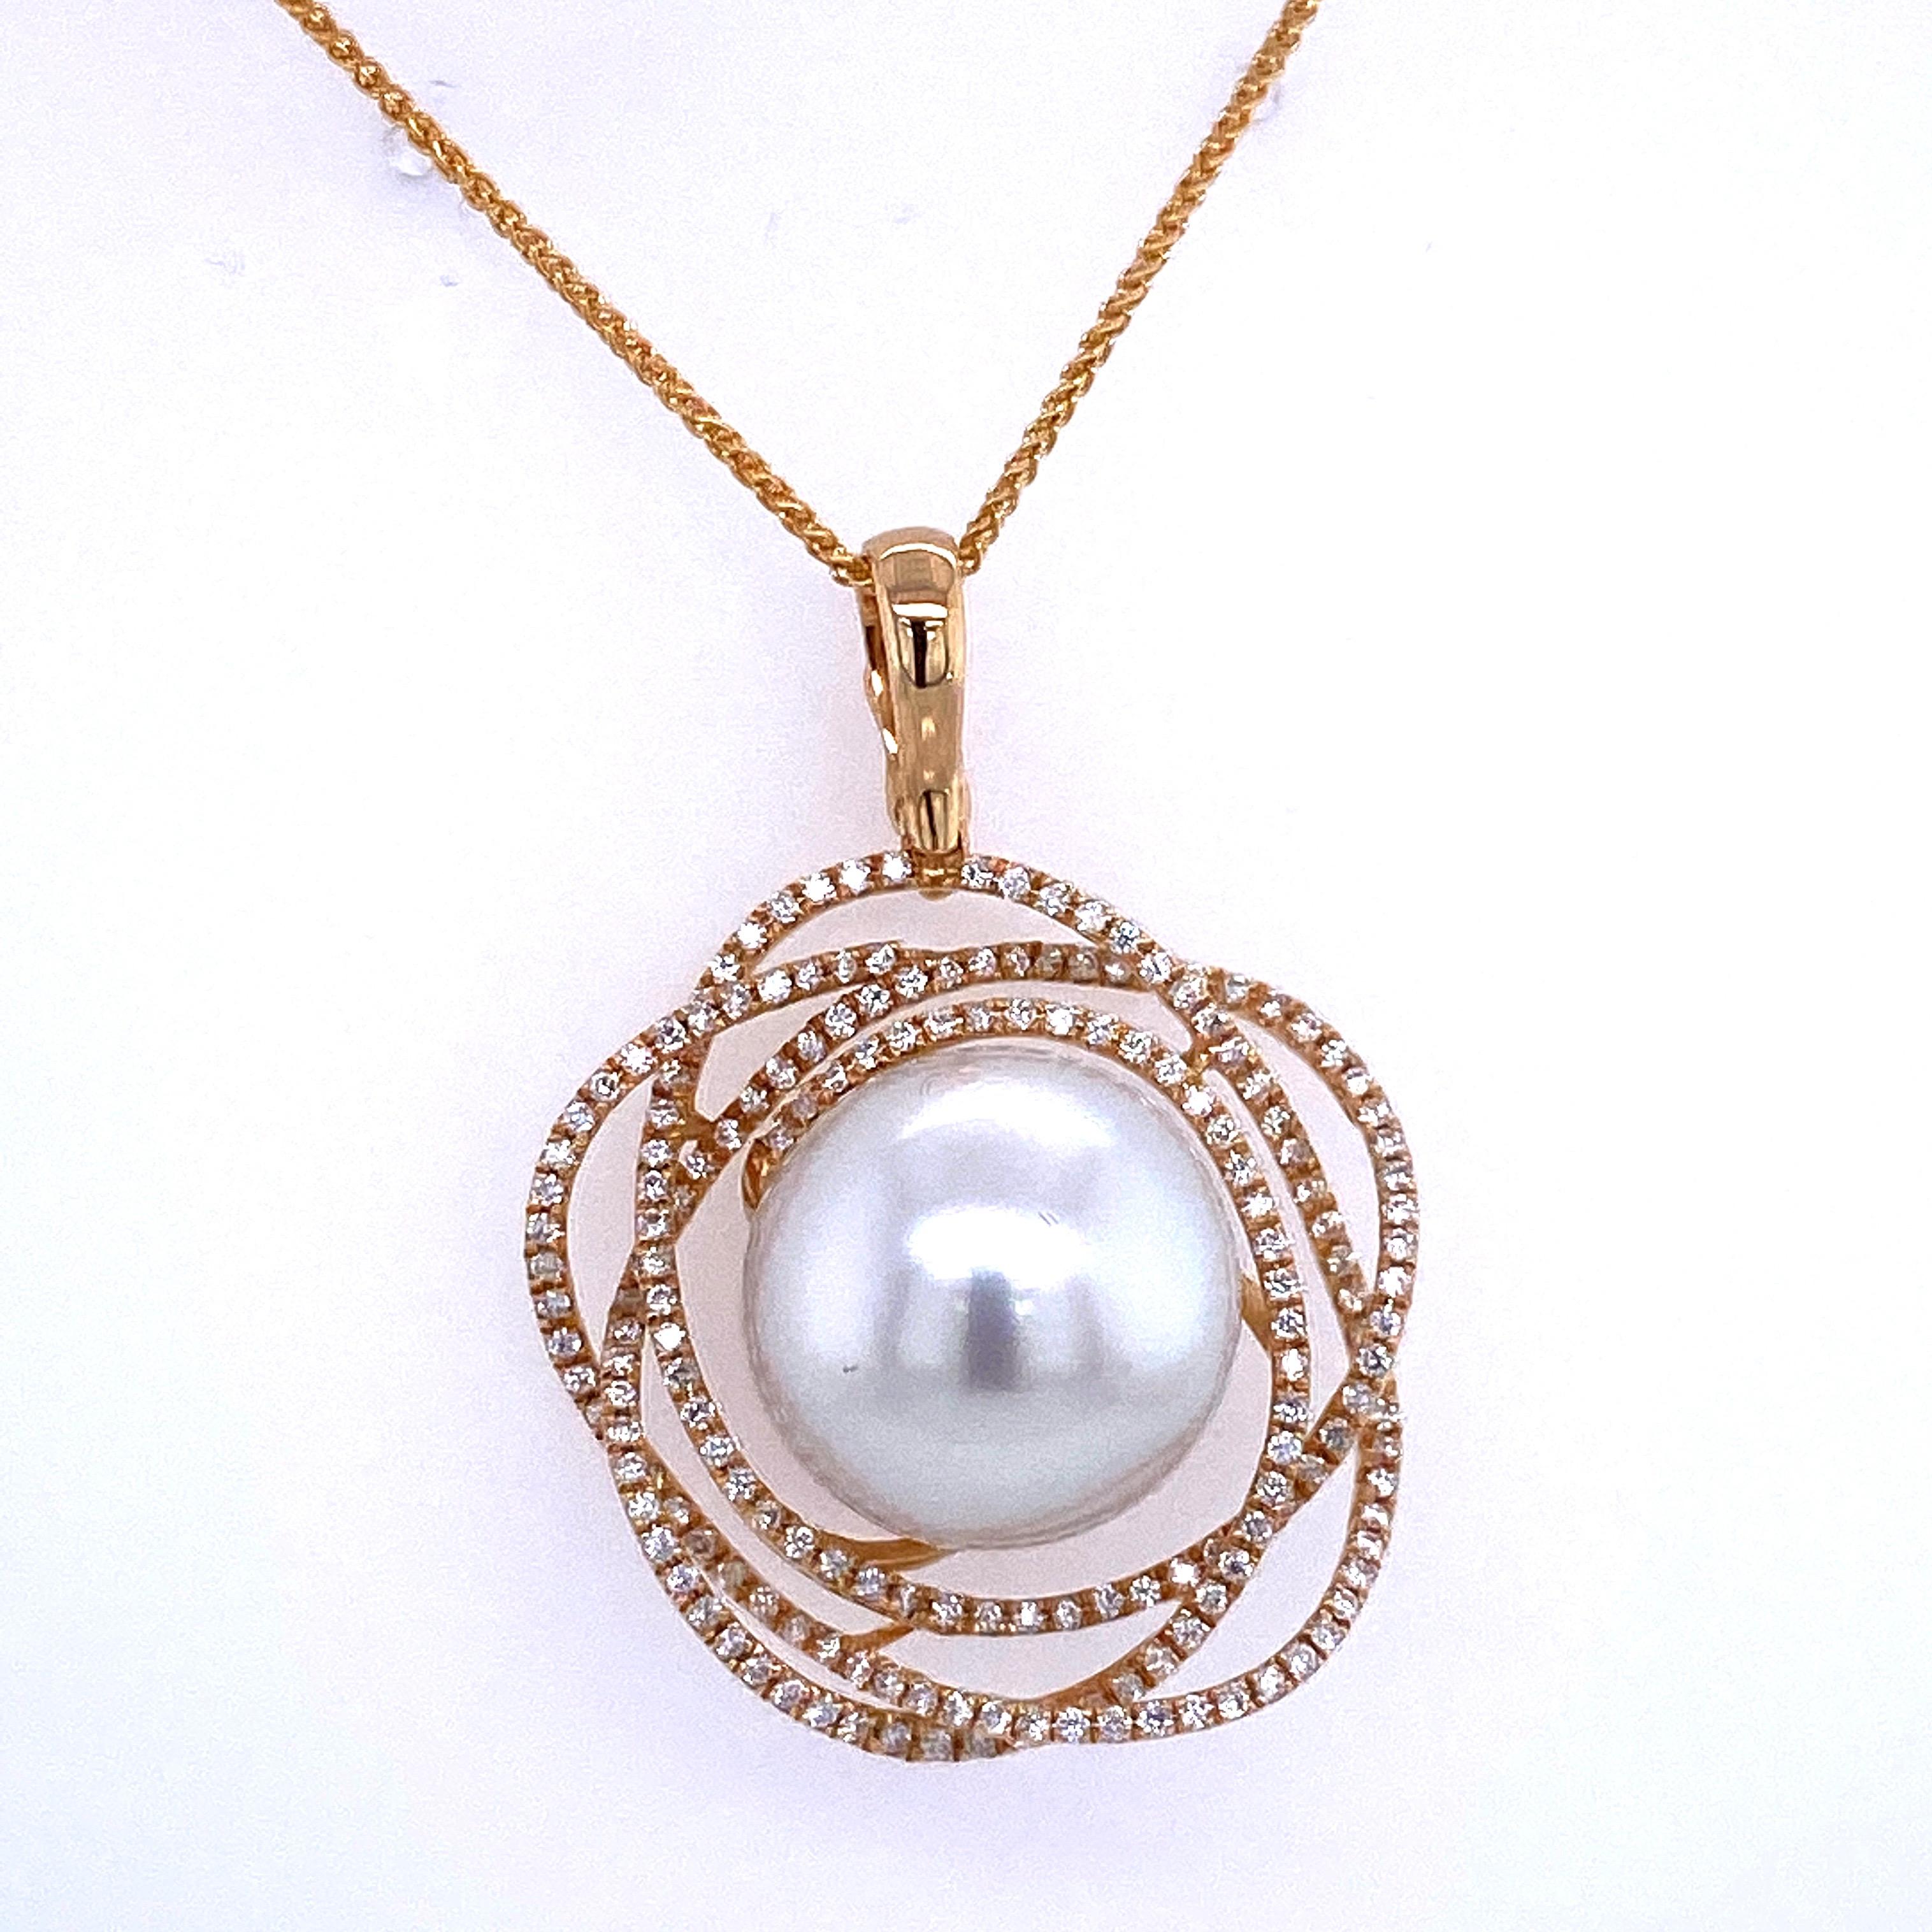 18K Yellow gold pendant featuring one South Sea Pearl measuring 13-14 mm flanked with 186 round brilliants weighing 0.68 carats.
Color G-H
Clarity SI

Pearl can be changed to a Pink, White or Tahitian Pearl upon request. Price subject to